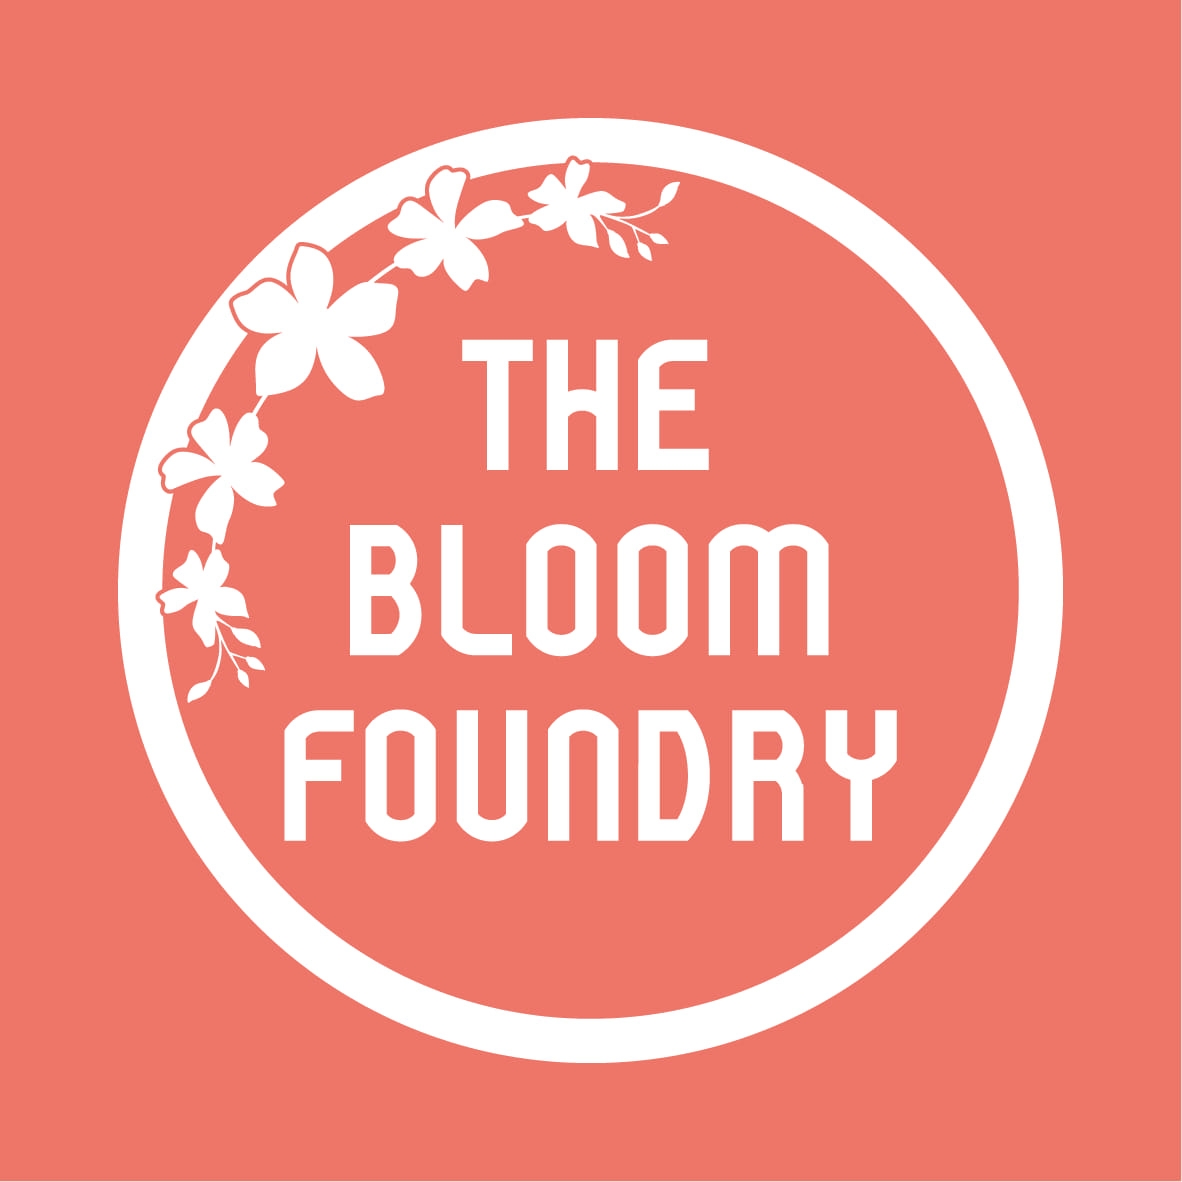 The Bloom Foundry logo